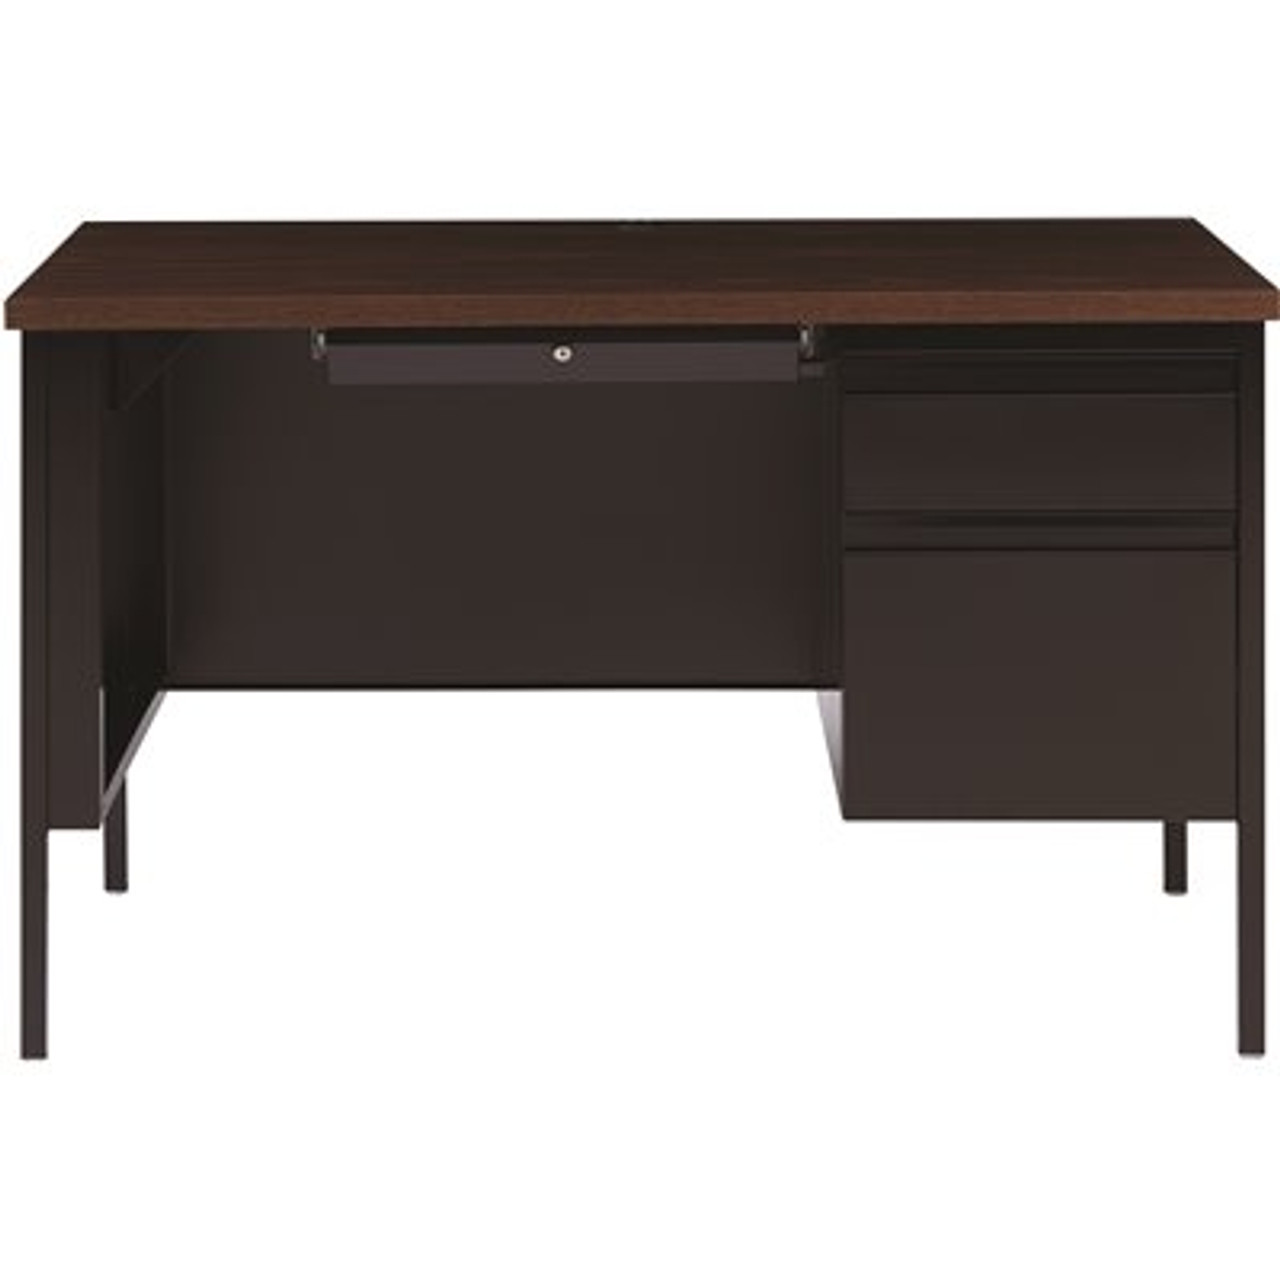 Hirsh Commercial 48 In. W X 30 In. D Rectangular Black / Walnut 3-Drawer Executive Desk With Right-Hand Single Pedestal File